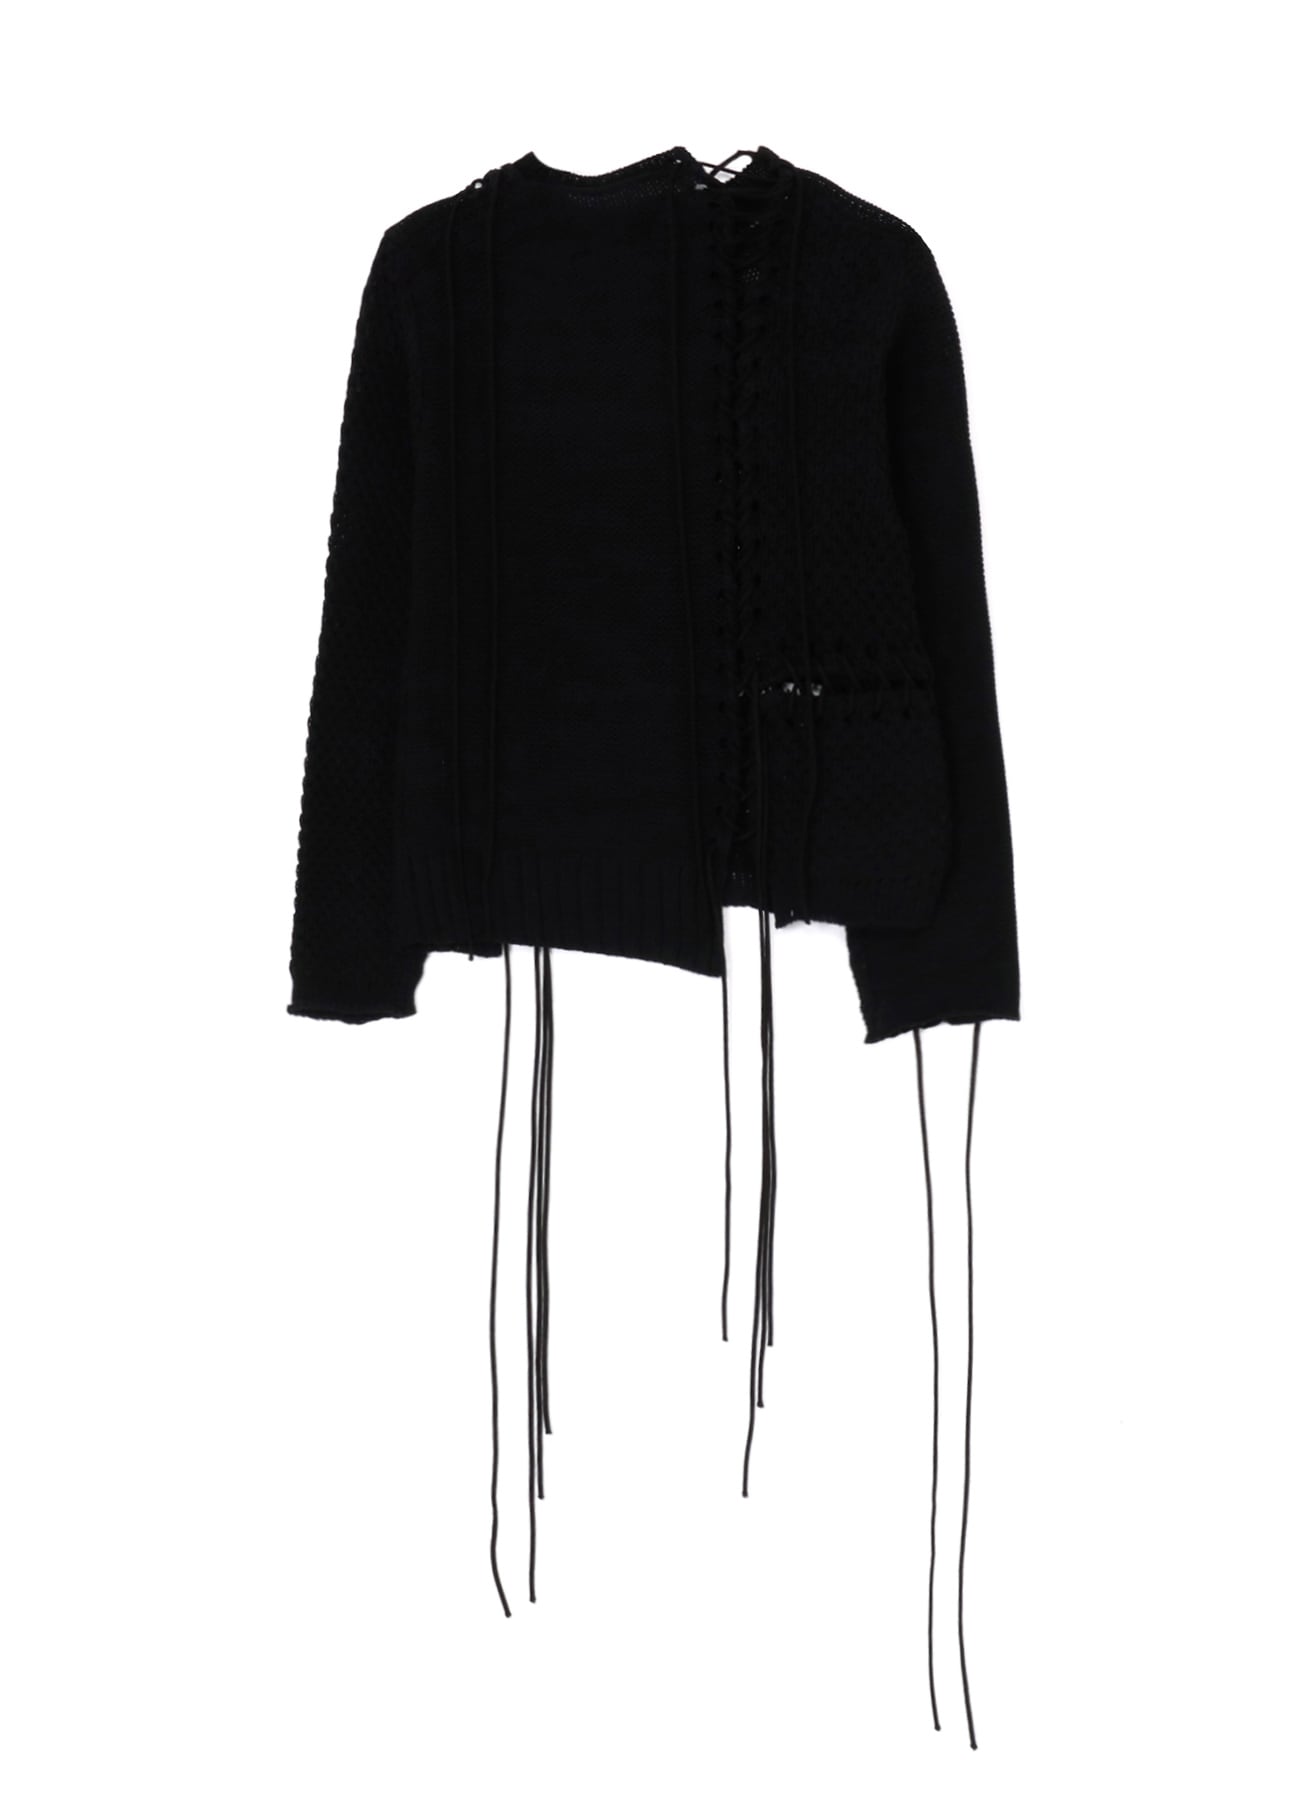 TUCK JERSEY LACE UP SHORT PULLOVER(S Black): Y's｜THE SHOP YOHJI 